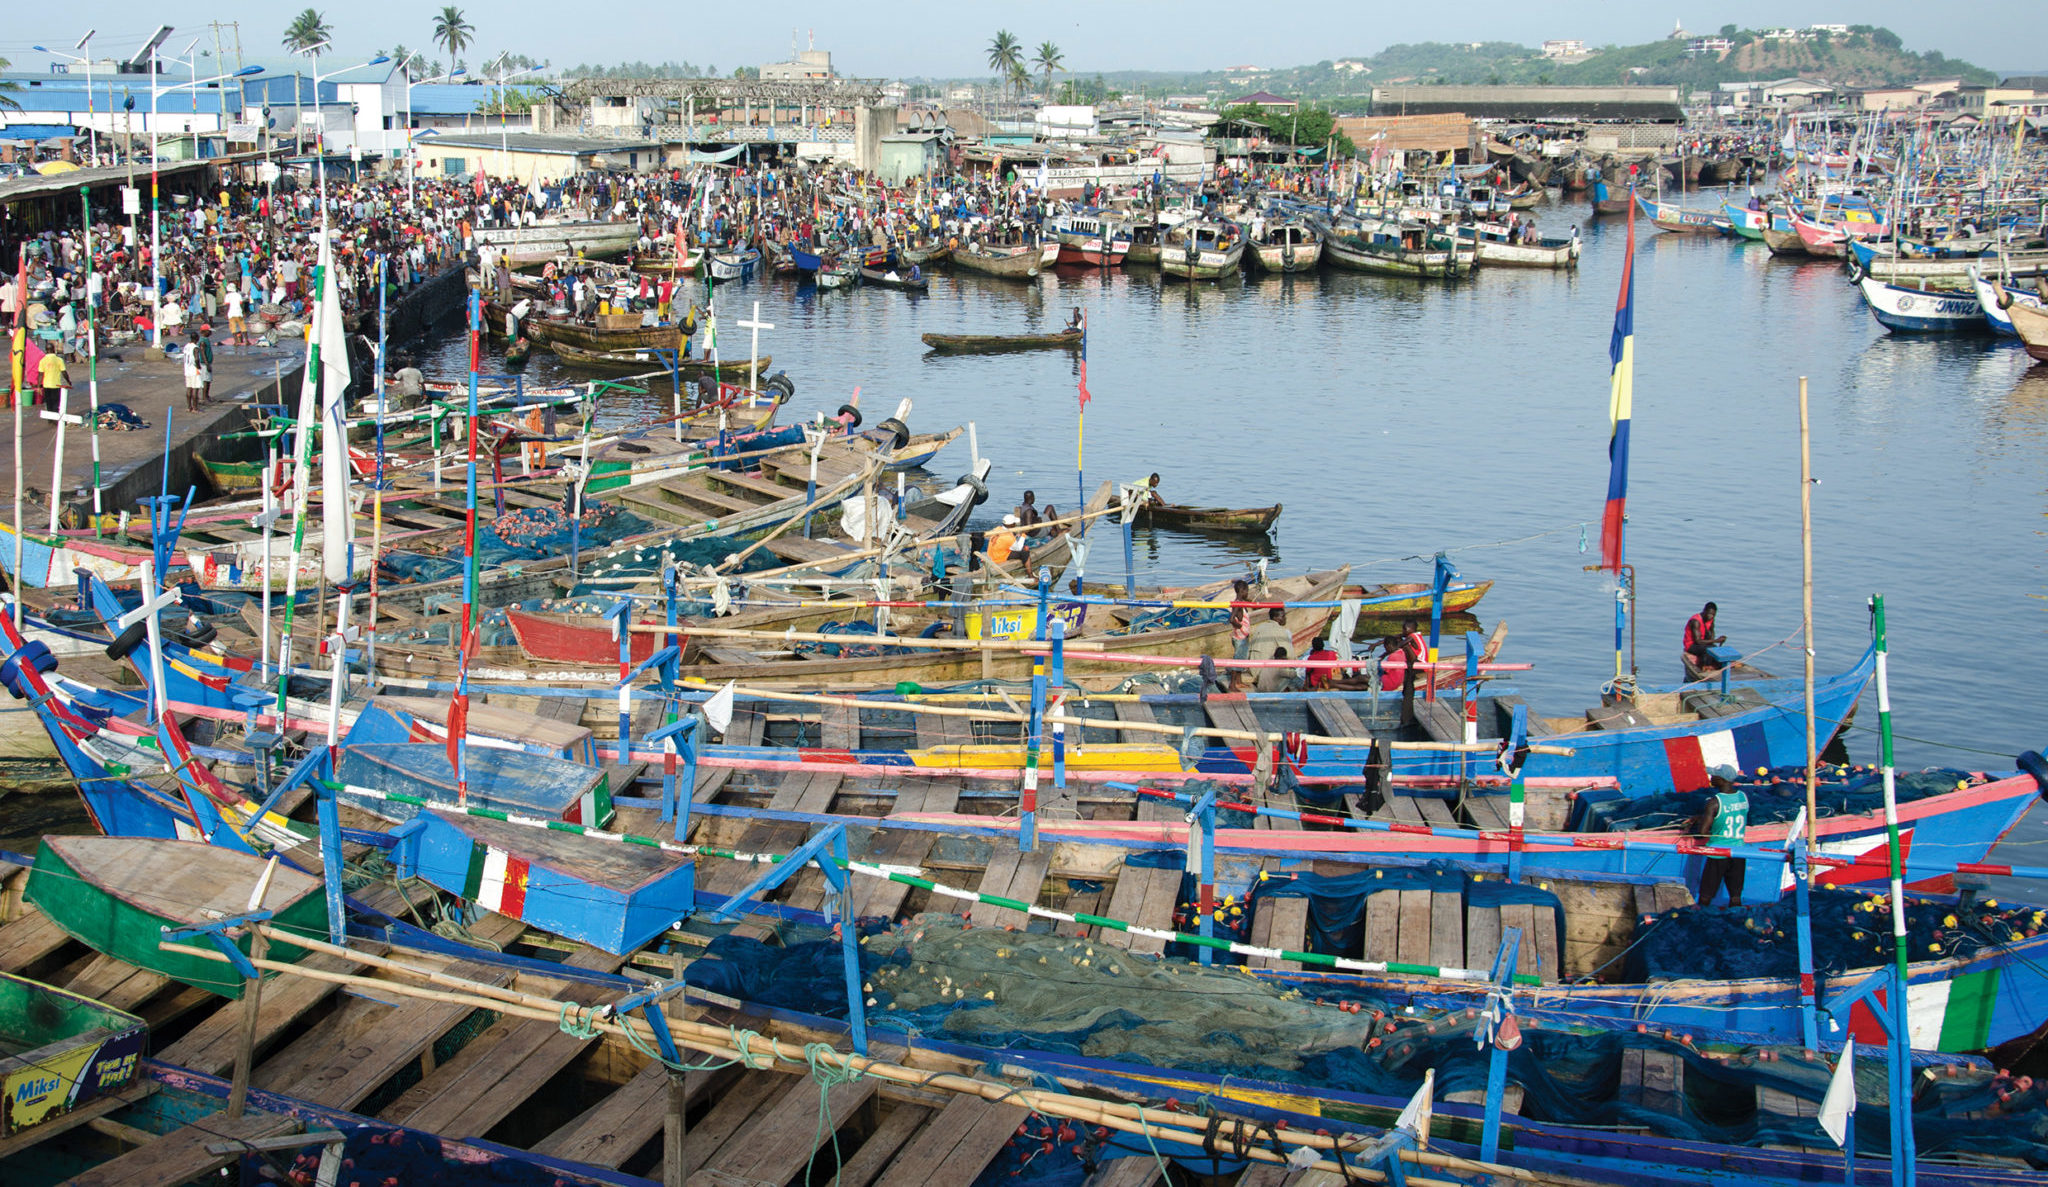 Wooden fishing boats at Elmina port. The decline in Ghana's fish stocks is putting livelihoods and food security at risk (Image: EJF)